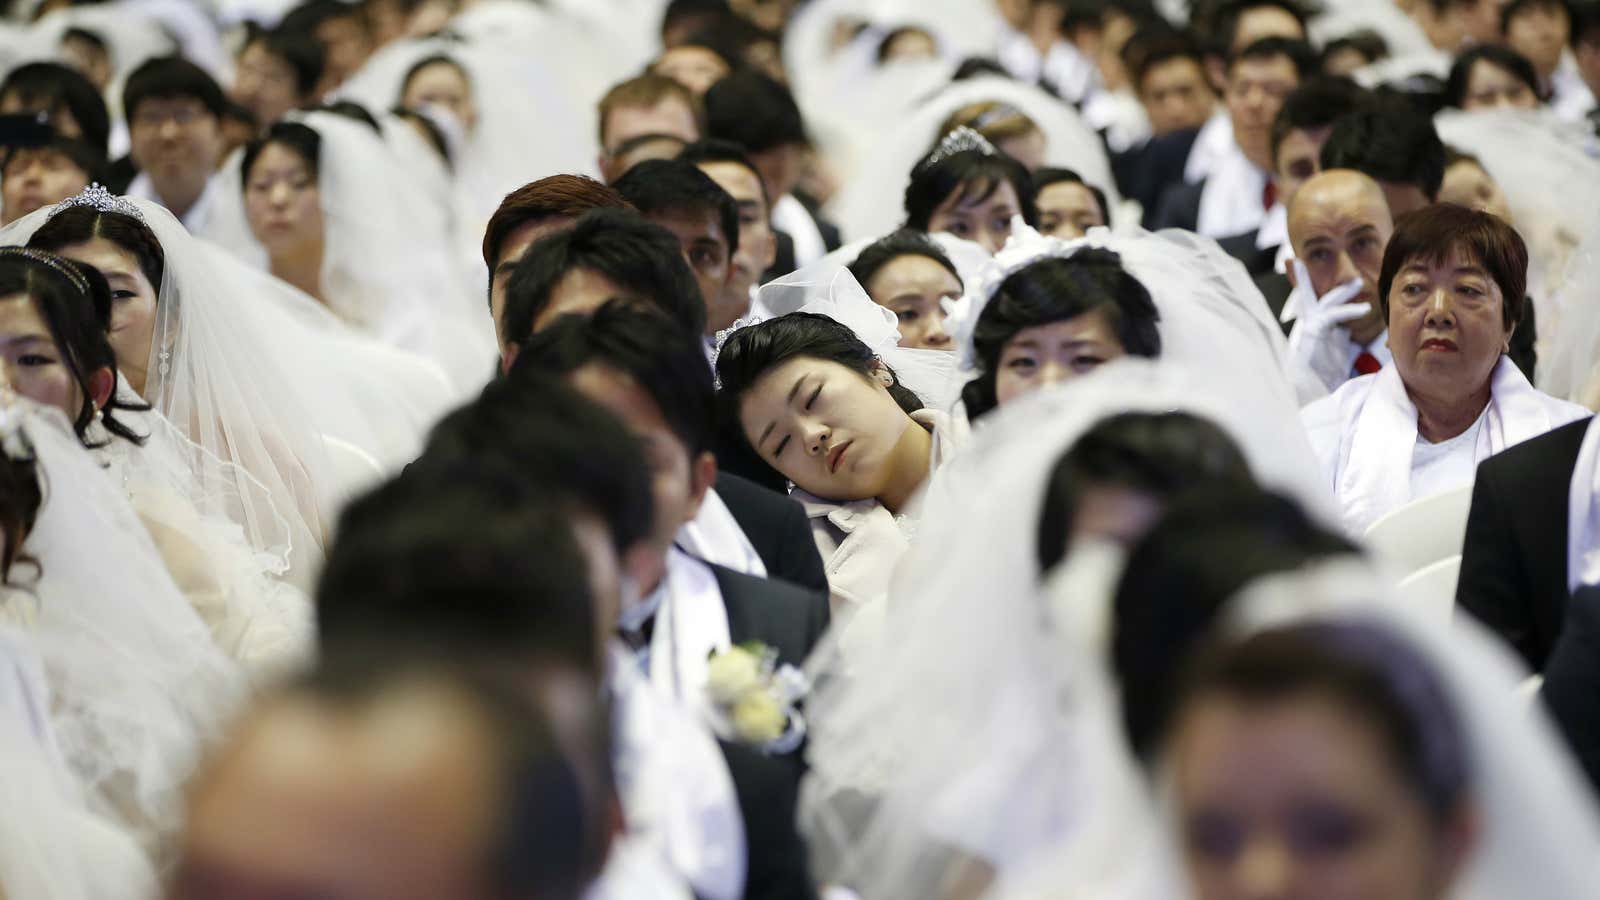 A bride naps during a mass wedding ceremony of the Unification Church at Cheongshim Peace World Centre in Gapyeong, March 3, 2015. The Unification Church…